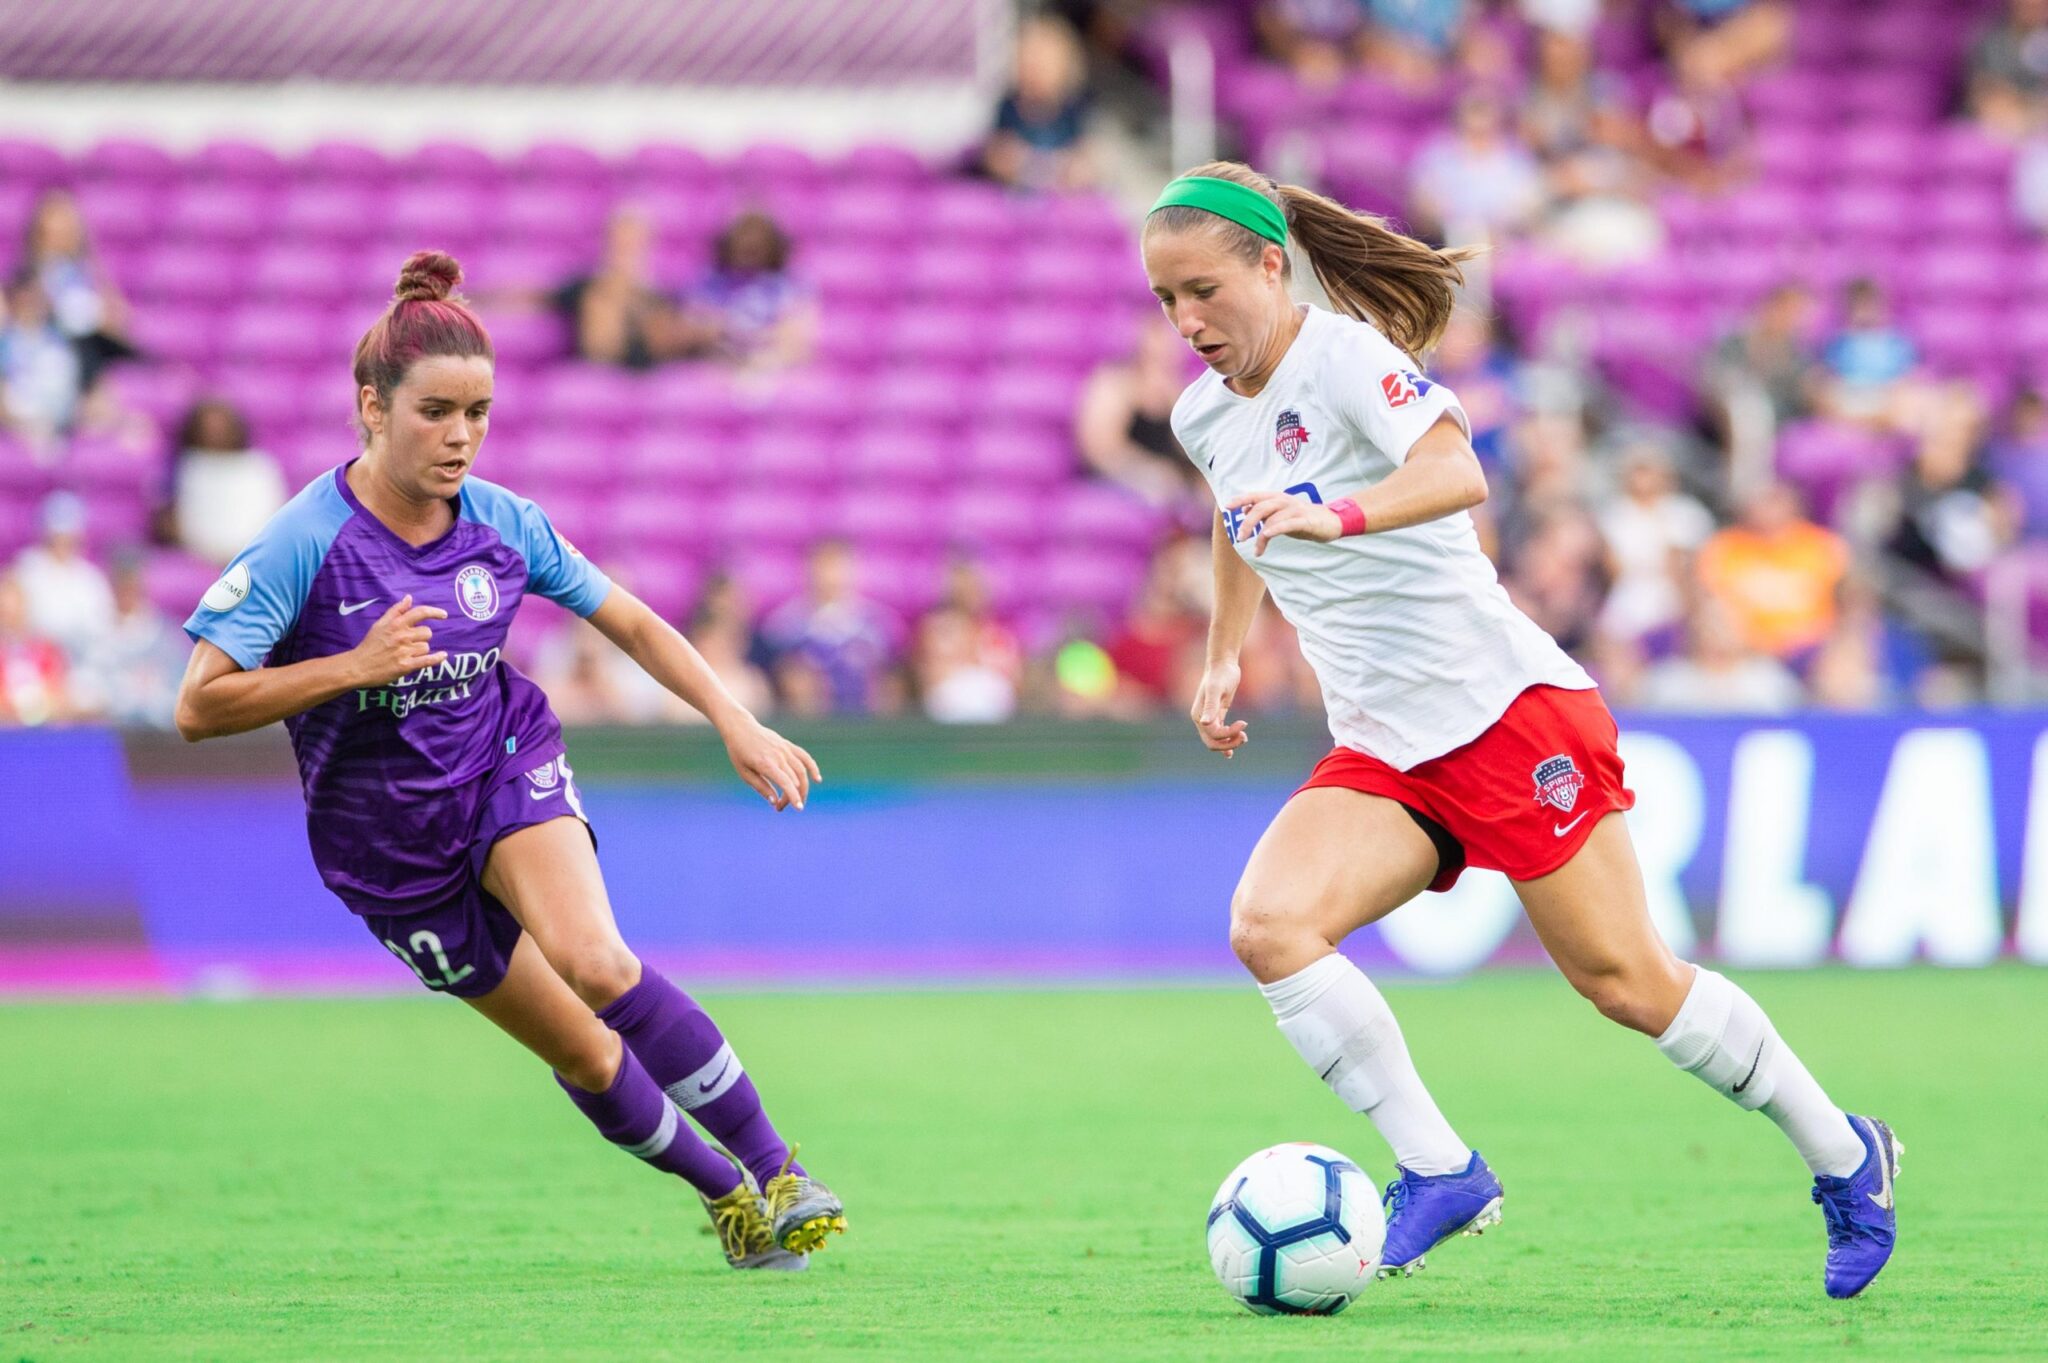 Bledsoe collects third clean sheet, Thomas claims first assist in W-League round 5 Featured Image